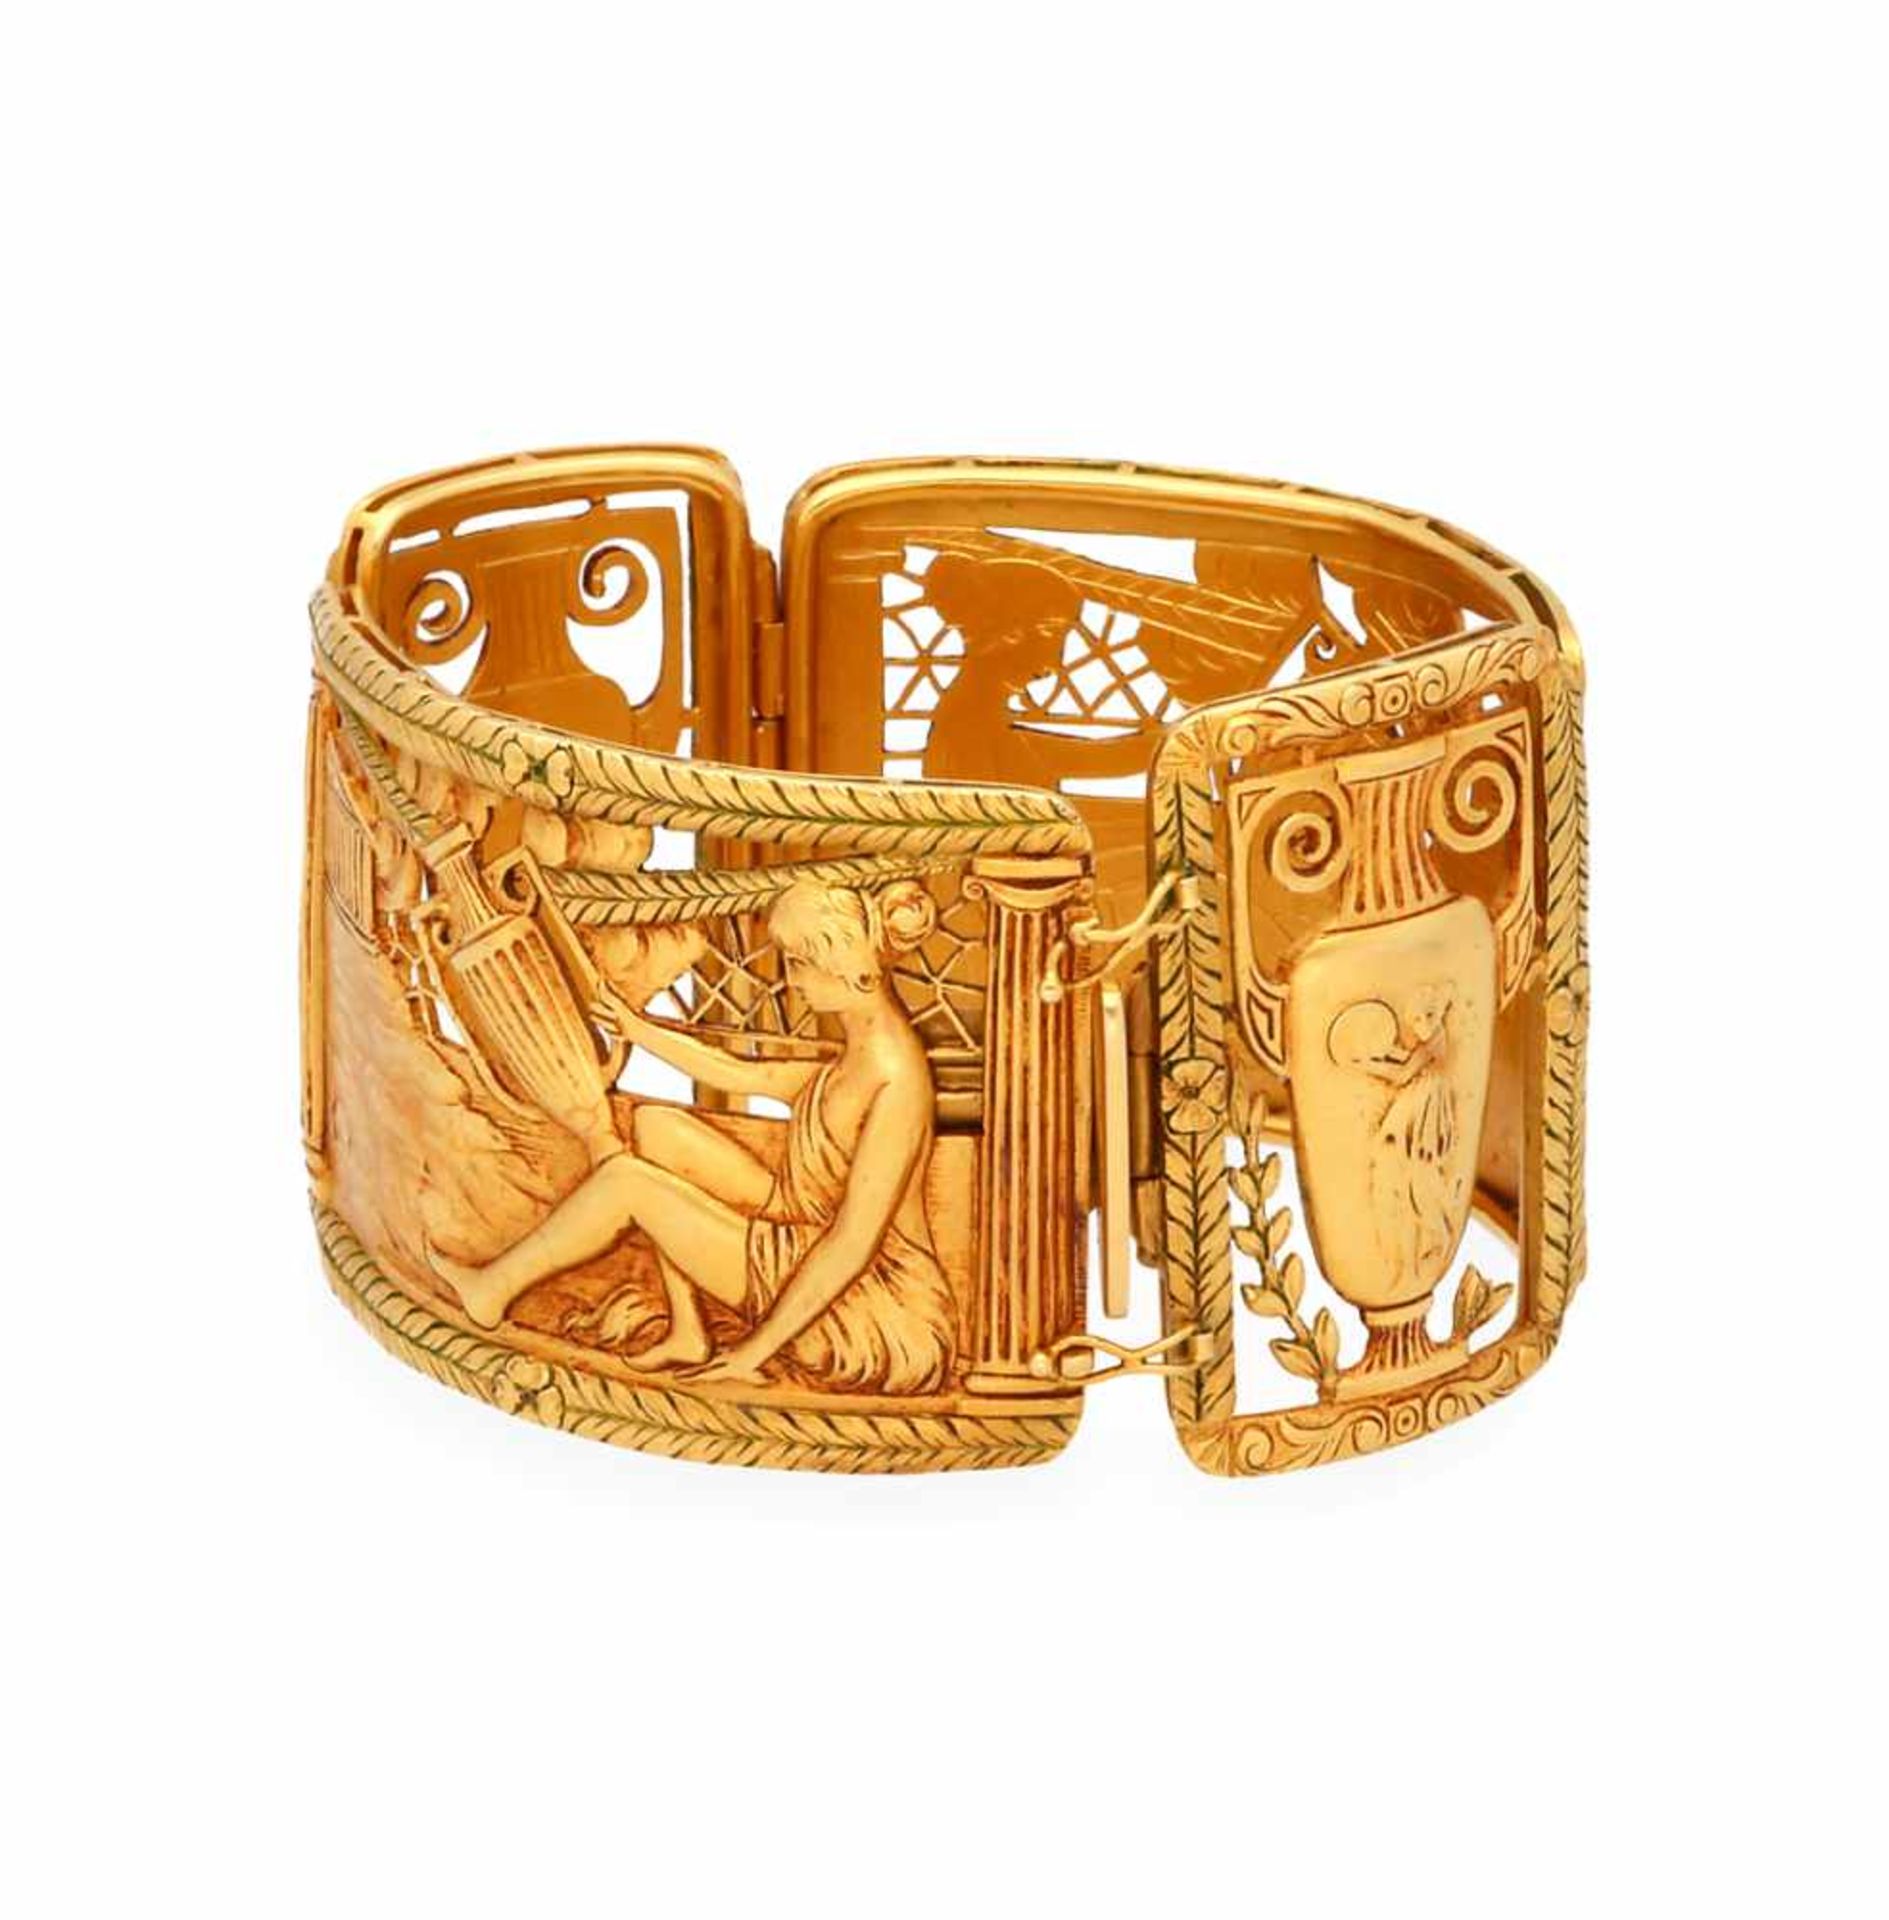 FUSET Y GRAU. Noucentist gold bracelet, circa 1922.Chiselled gold with representation of classical